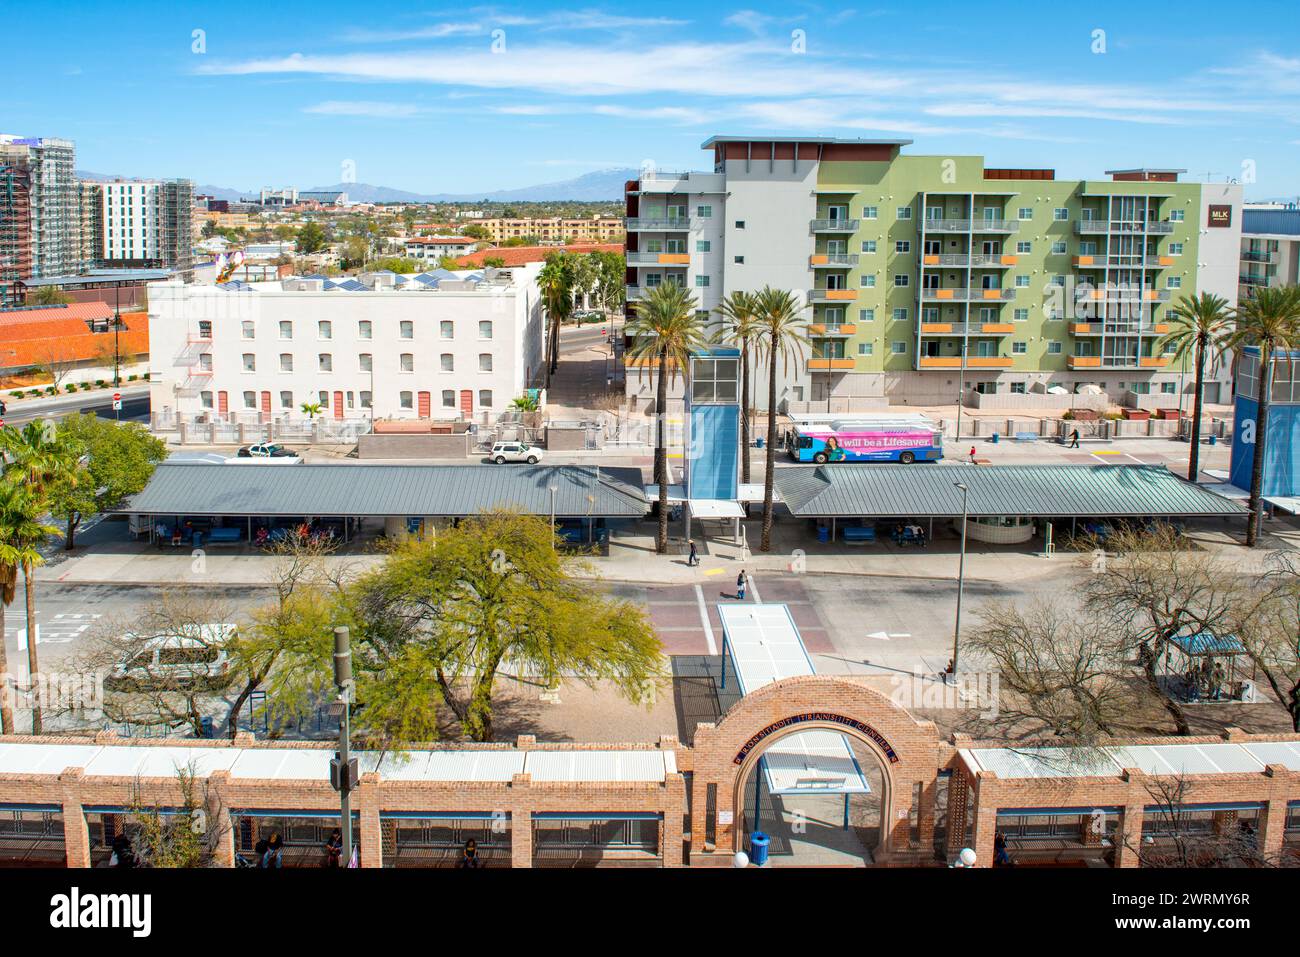 Aerial view of the area around the Linda Ronstadt bus station in downtown Tucson AZ Stock Photo